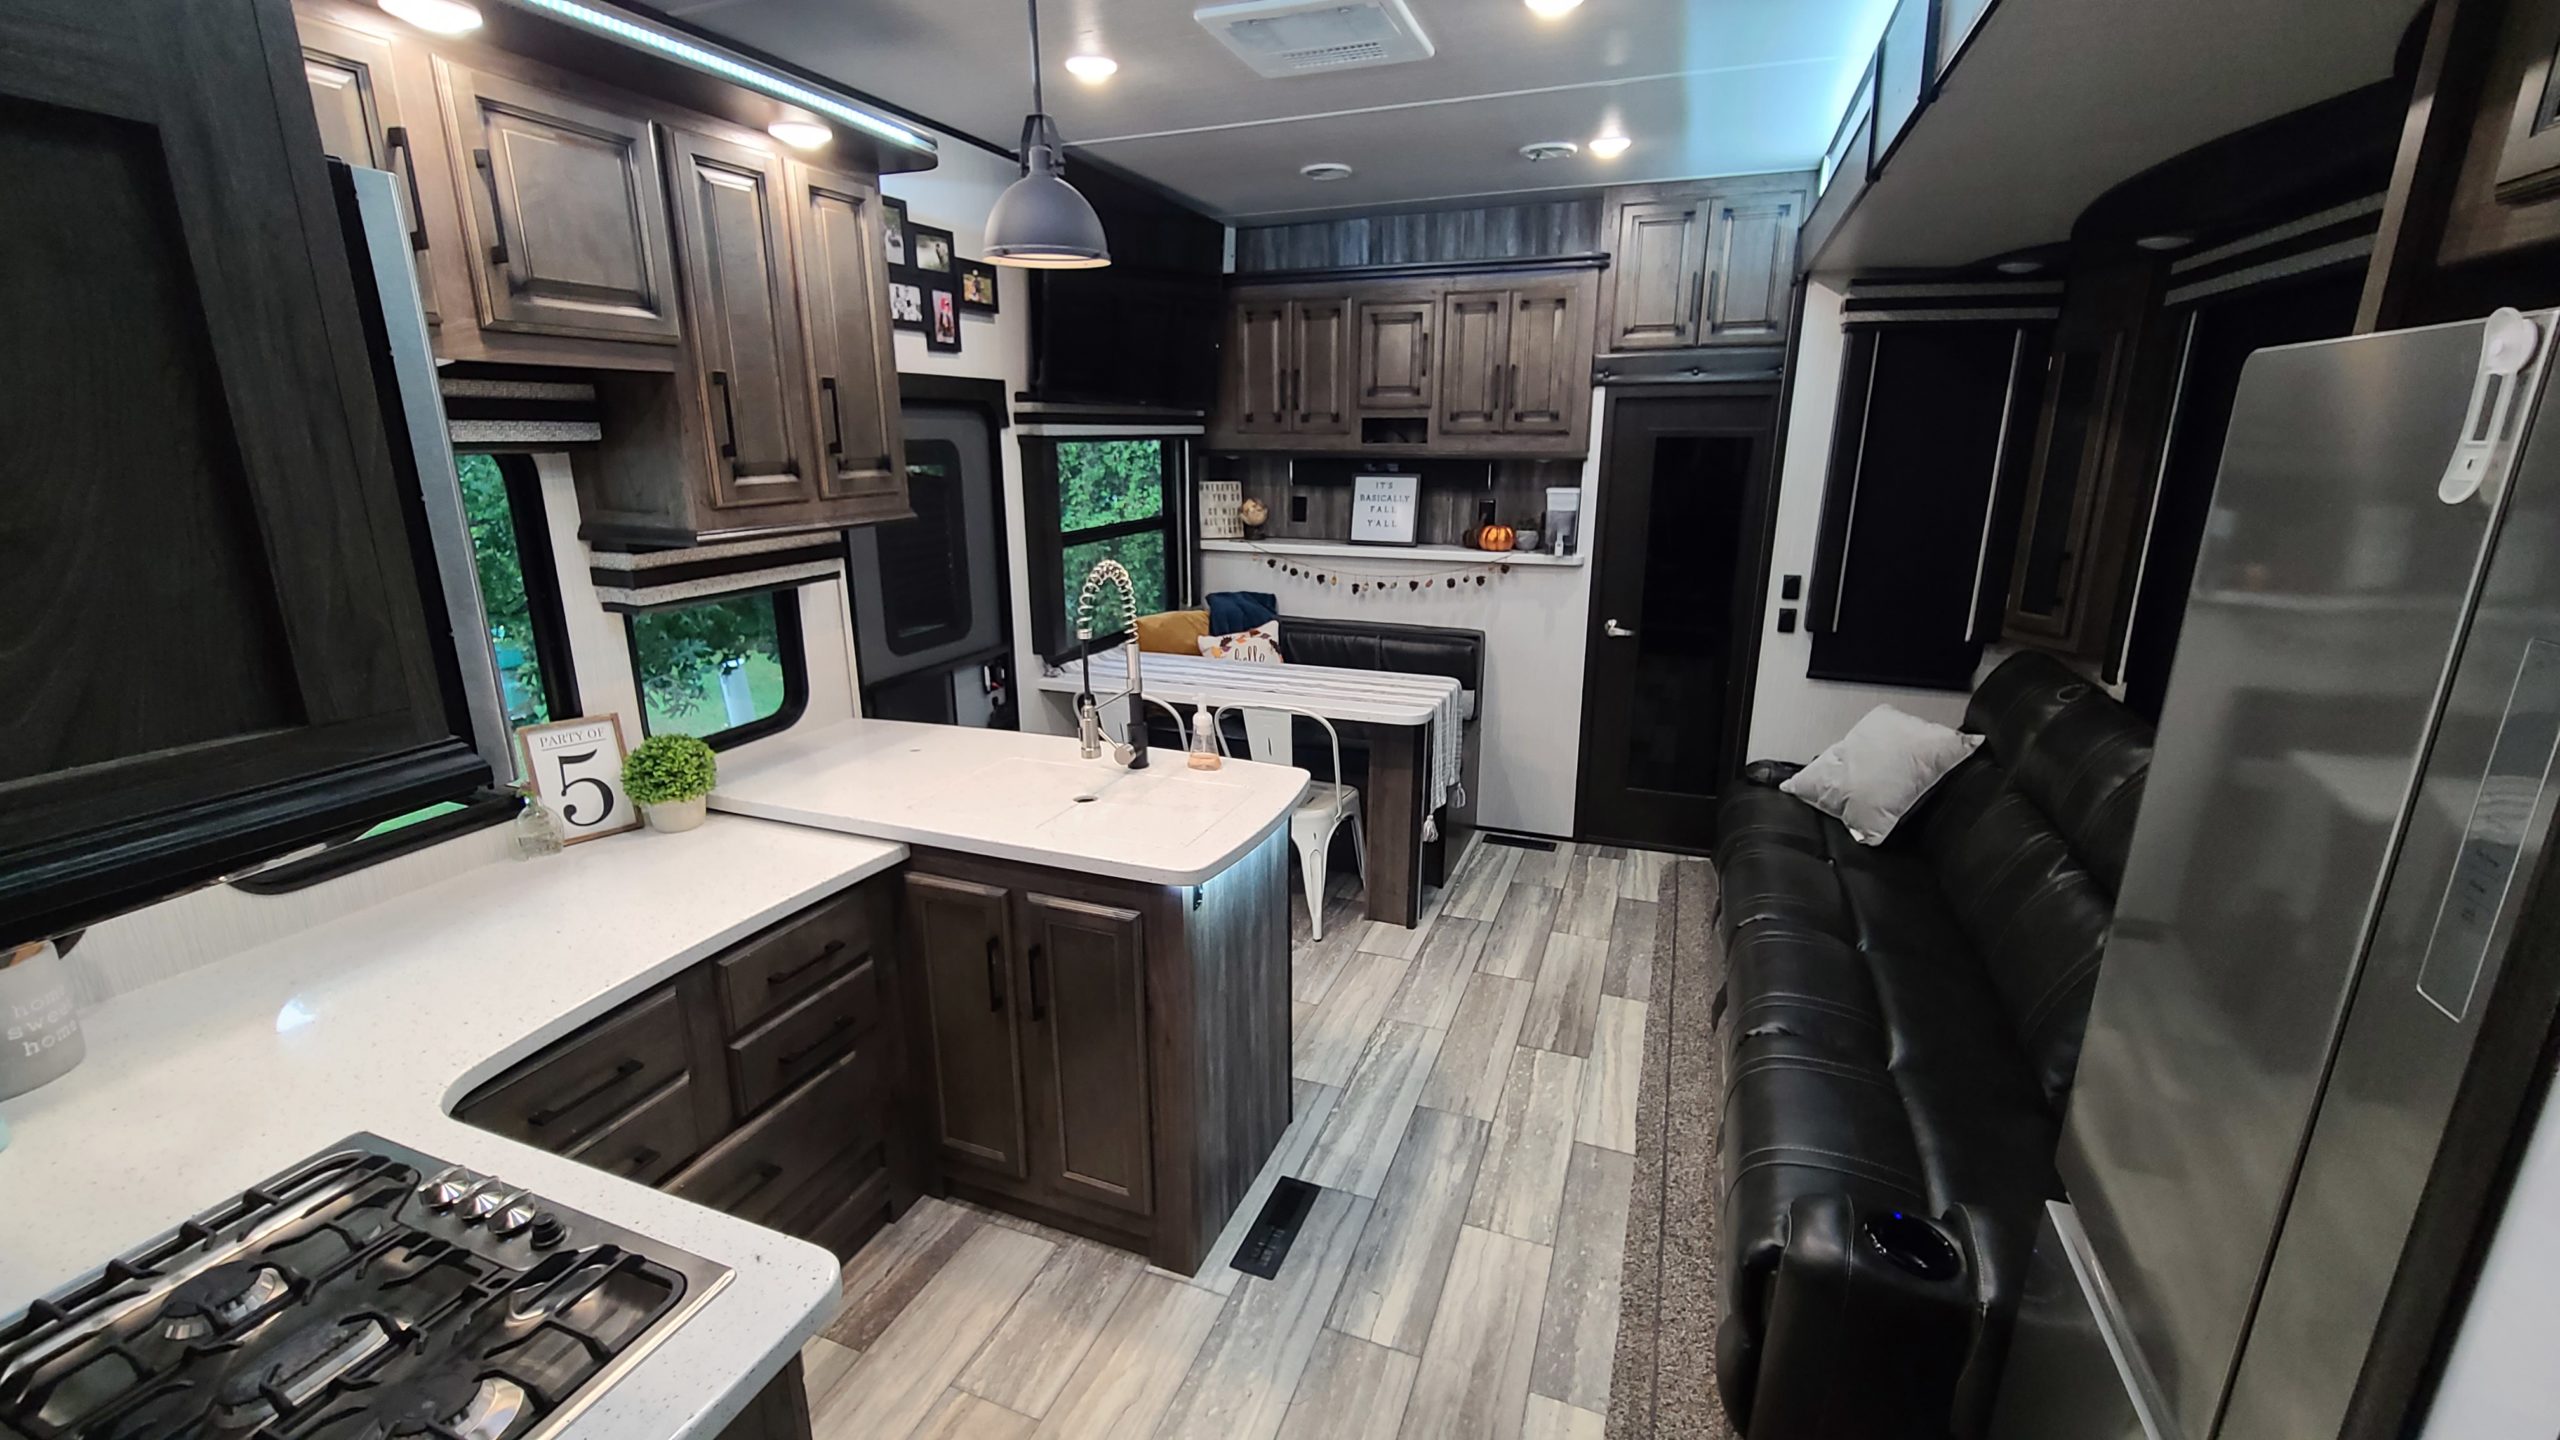 The kitchen, dining area and couch inside the Heartland Cyclone RV.